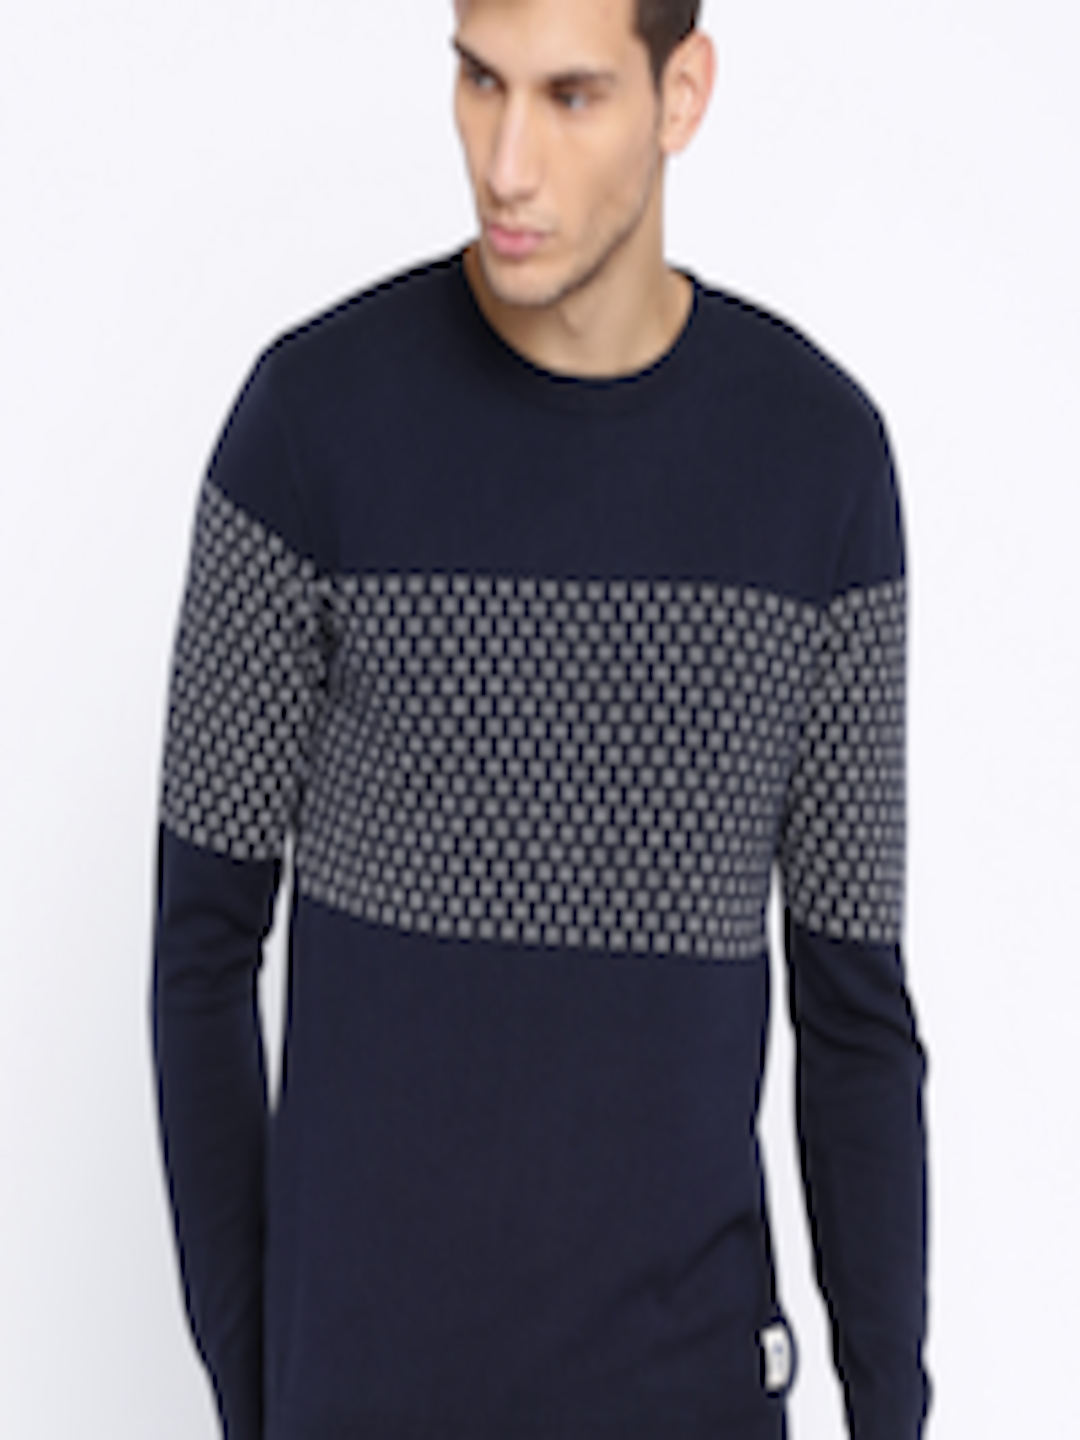 Buy Pepe Jeans Navy Patterned Sweater - Sweaters for Men 1632911 | Myntra